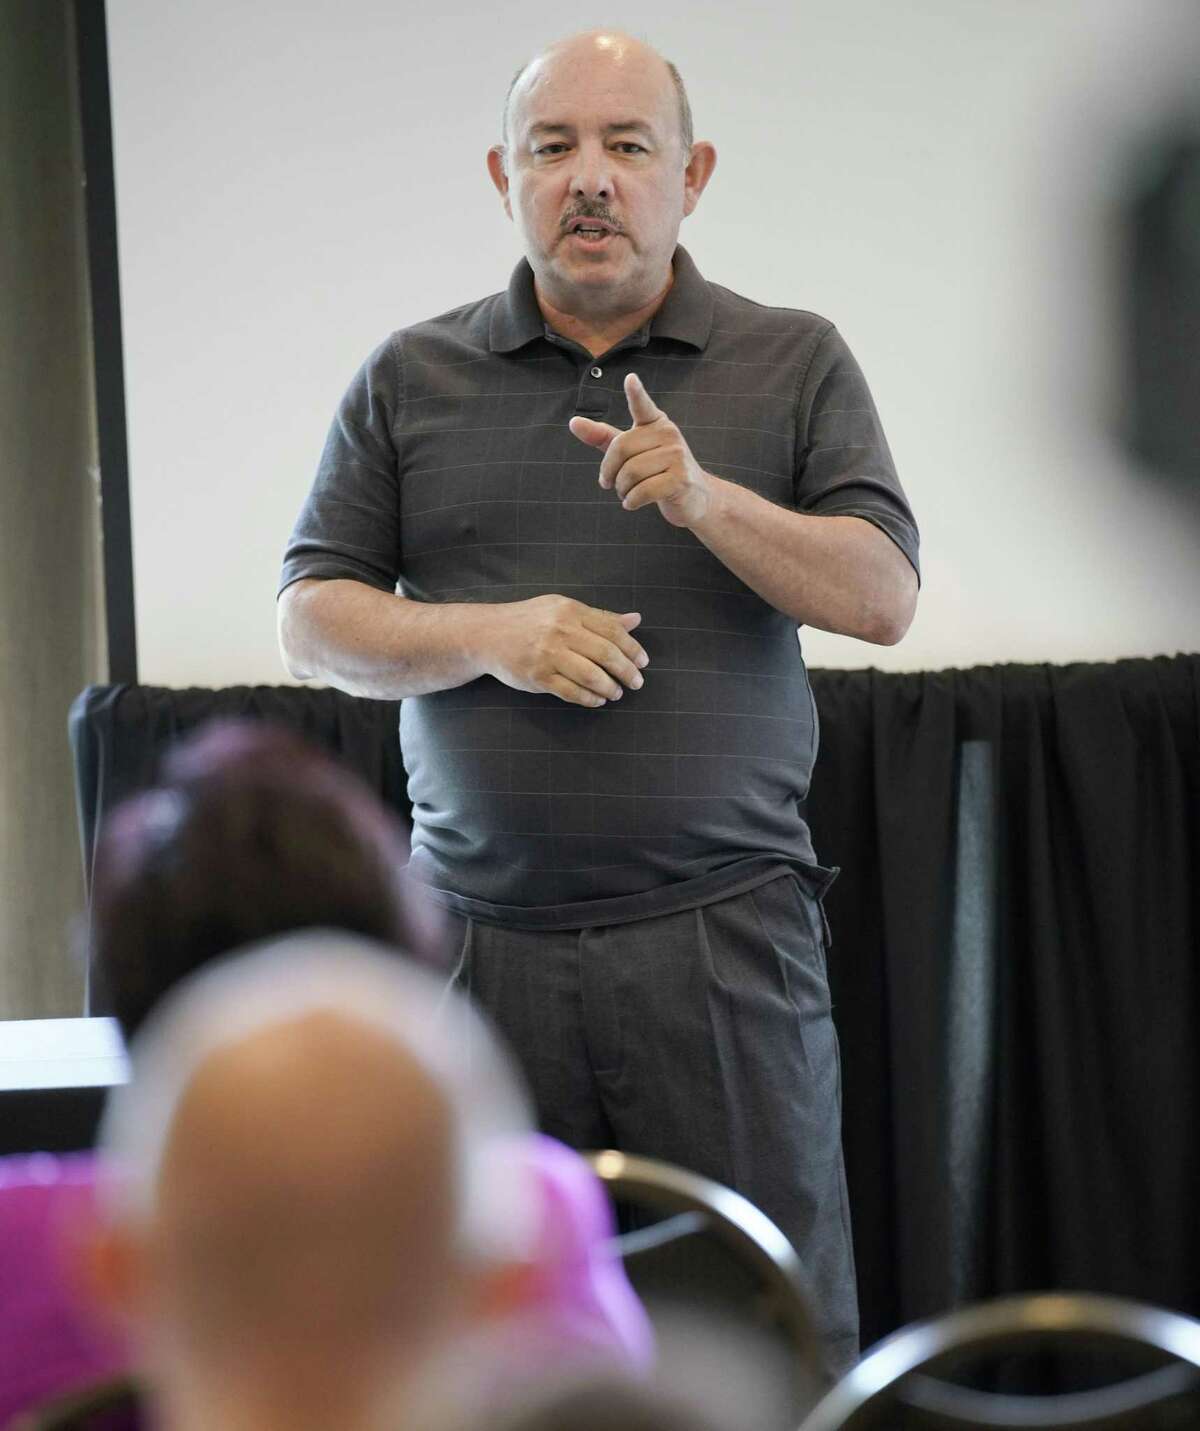 Former federal deportation officer Edwardo Rodriguez speaks during a discussion about immigration, Friday, June 1, 2018, during the 89th LULAC State Convention in San Antonio. (Darren Abate/For the San Antonio Express-News)